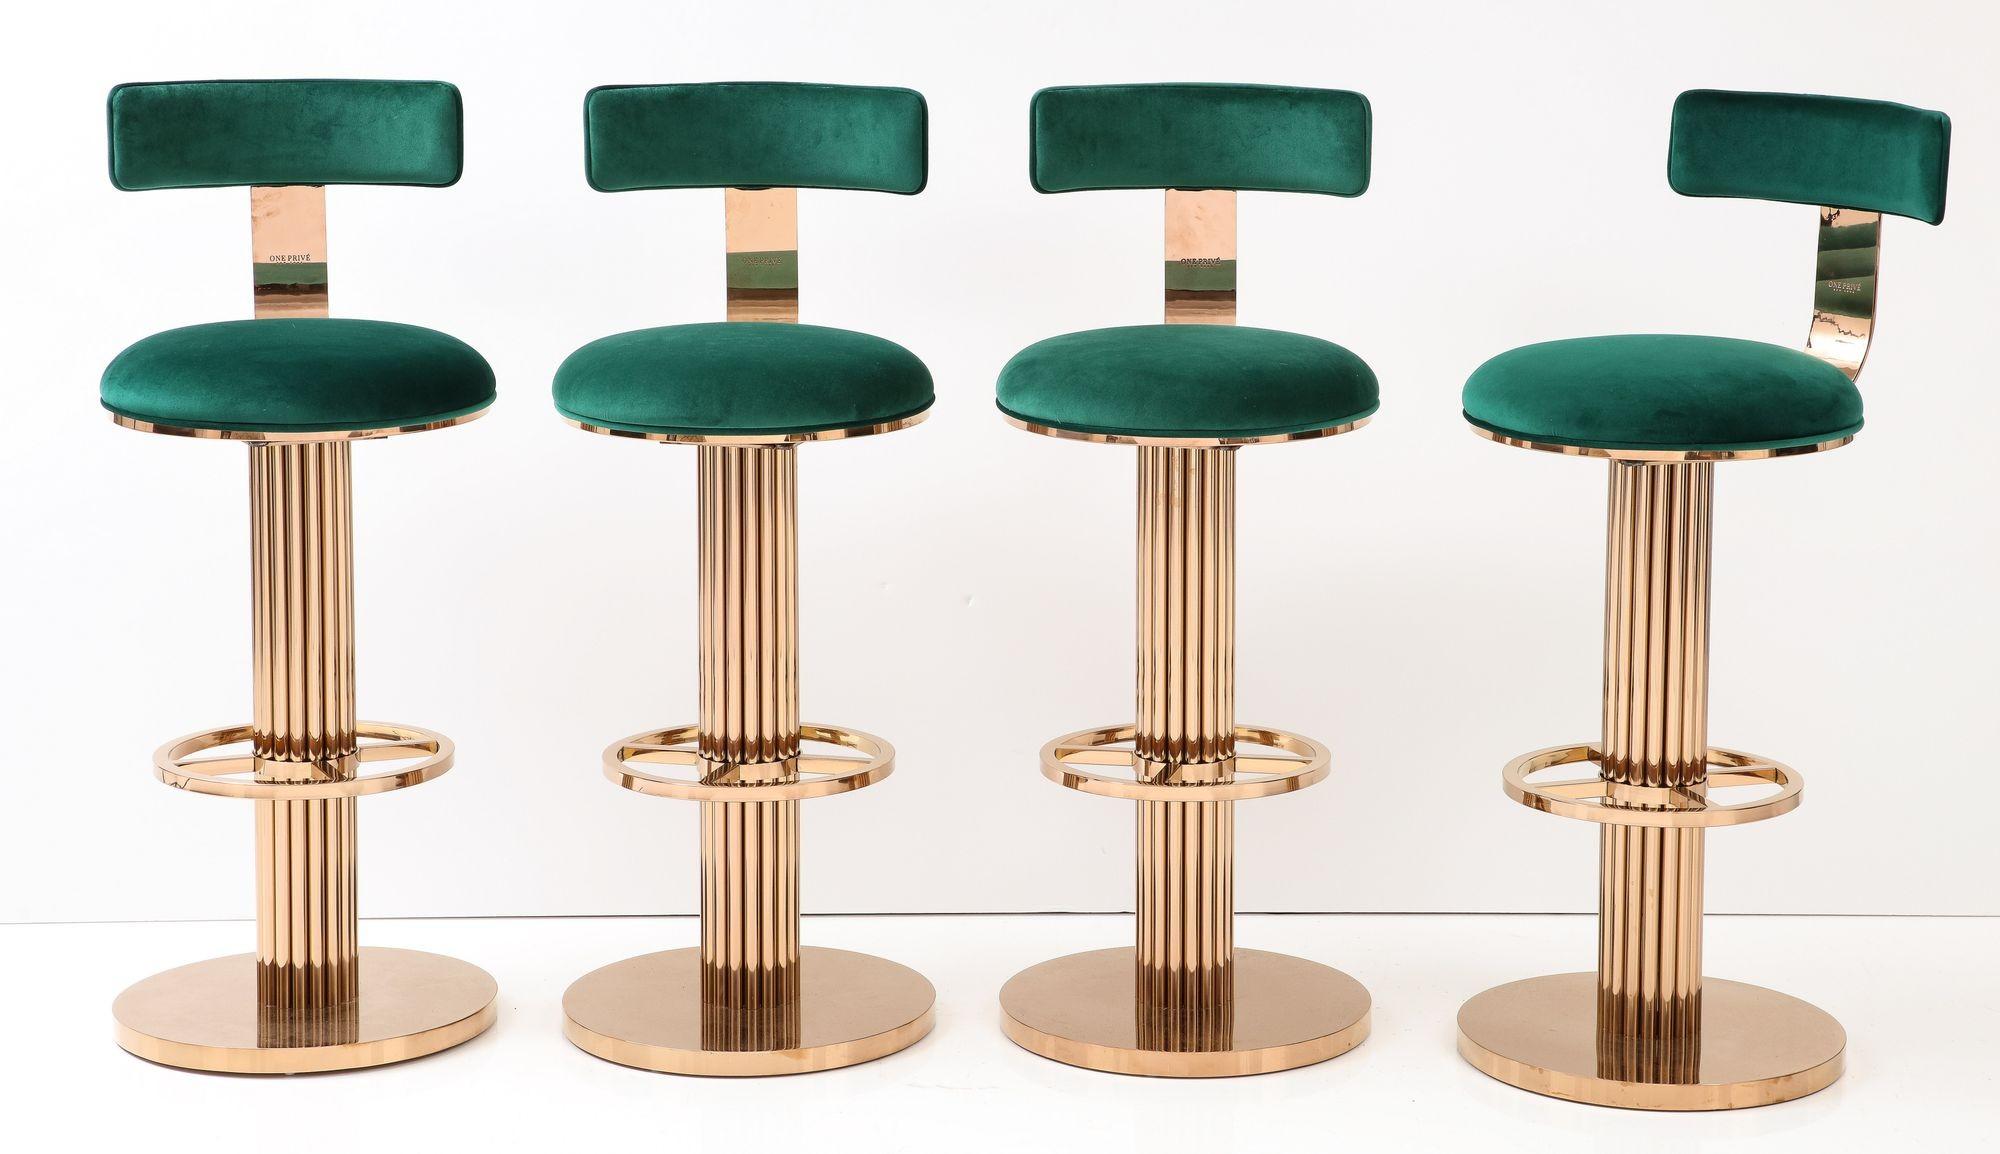 A set of four barstools with a subtle rose gold finish and emerald velvet upholstery. This set is a reproduction of the Art Deco style Design For Leisure stools that were produced in the 1980s. Each base has a fluted design with a foot rest.